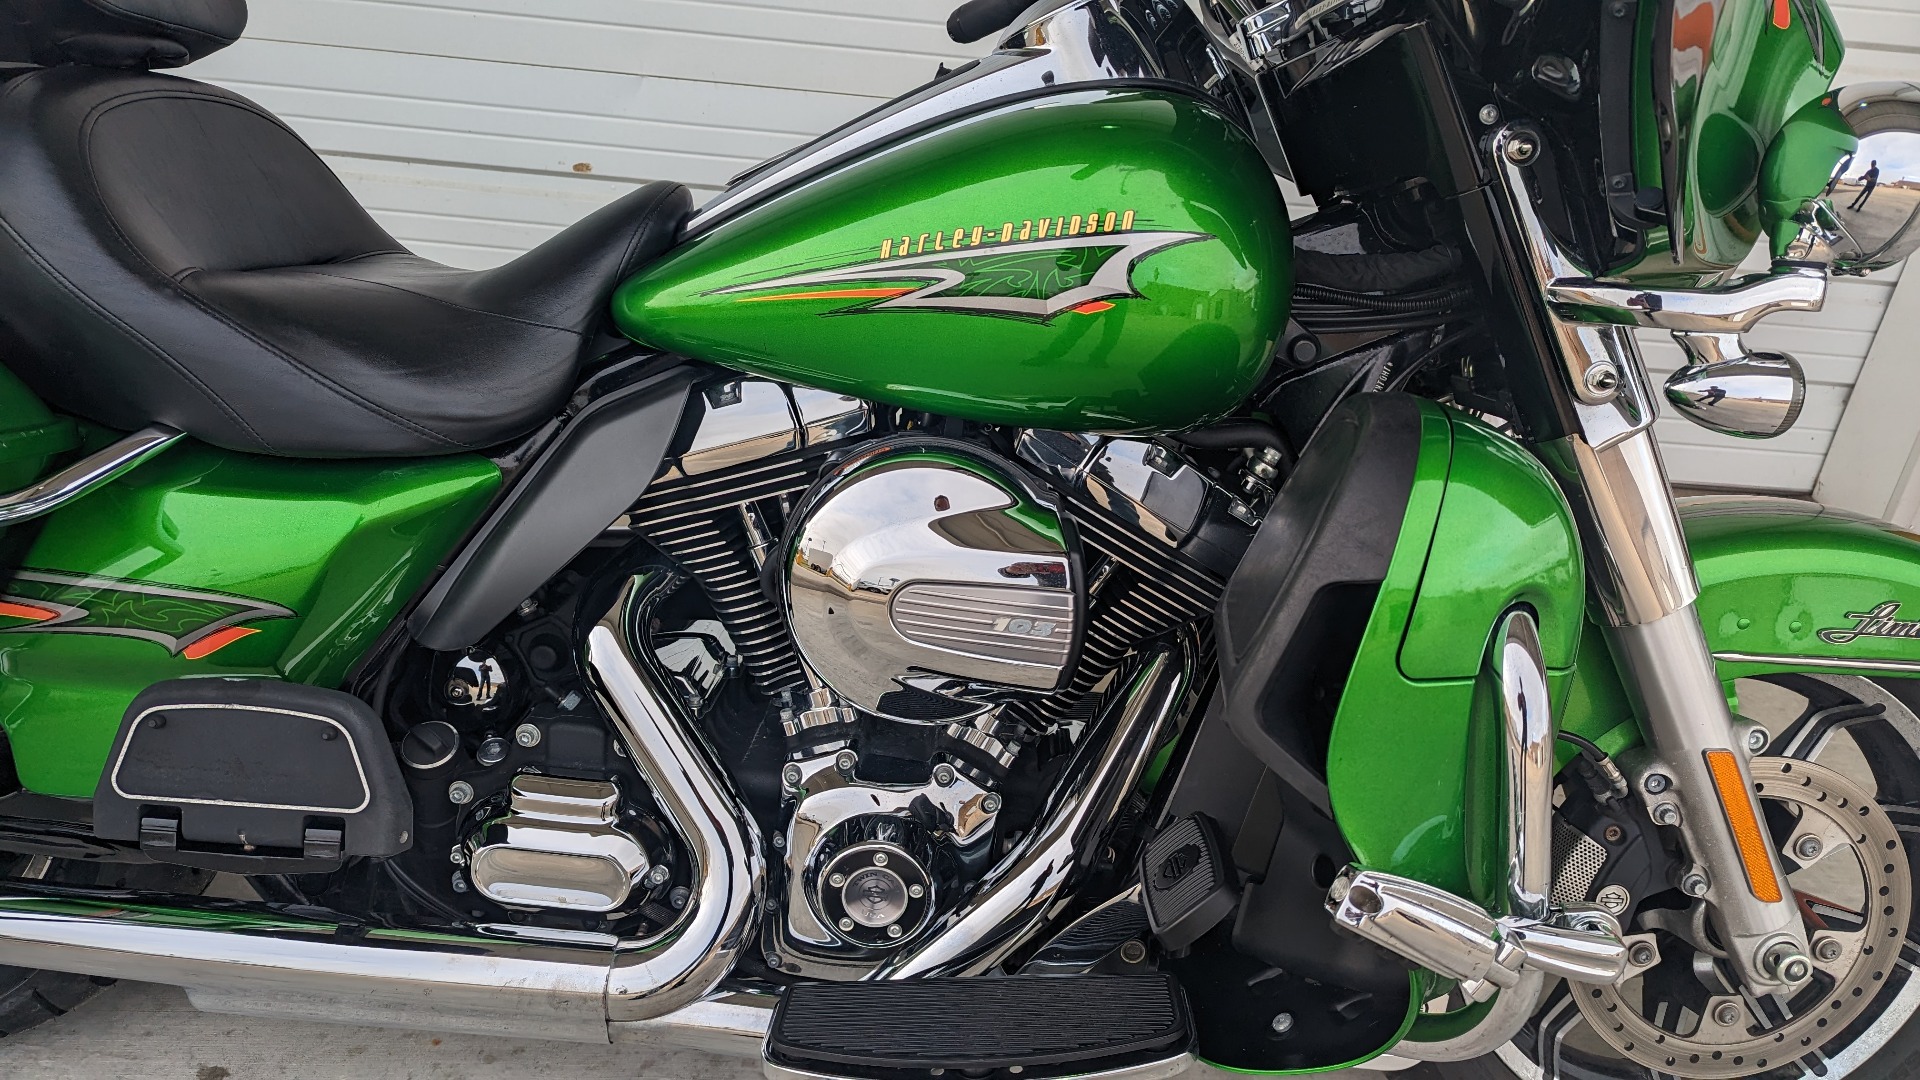 2015 harley davidson ultra limited radioactive green for sale in mississippi - Photo 4